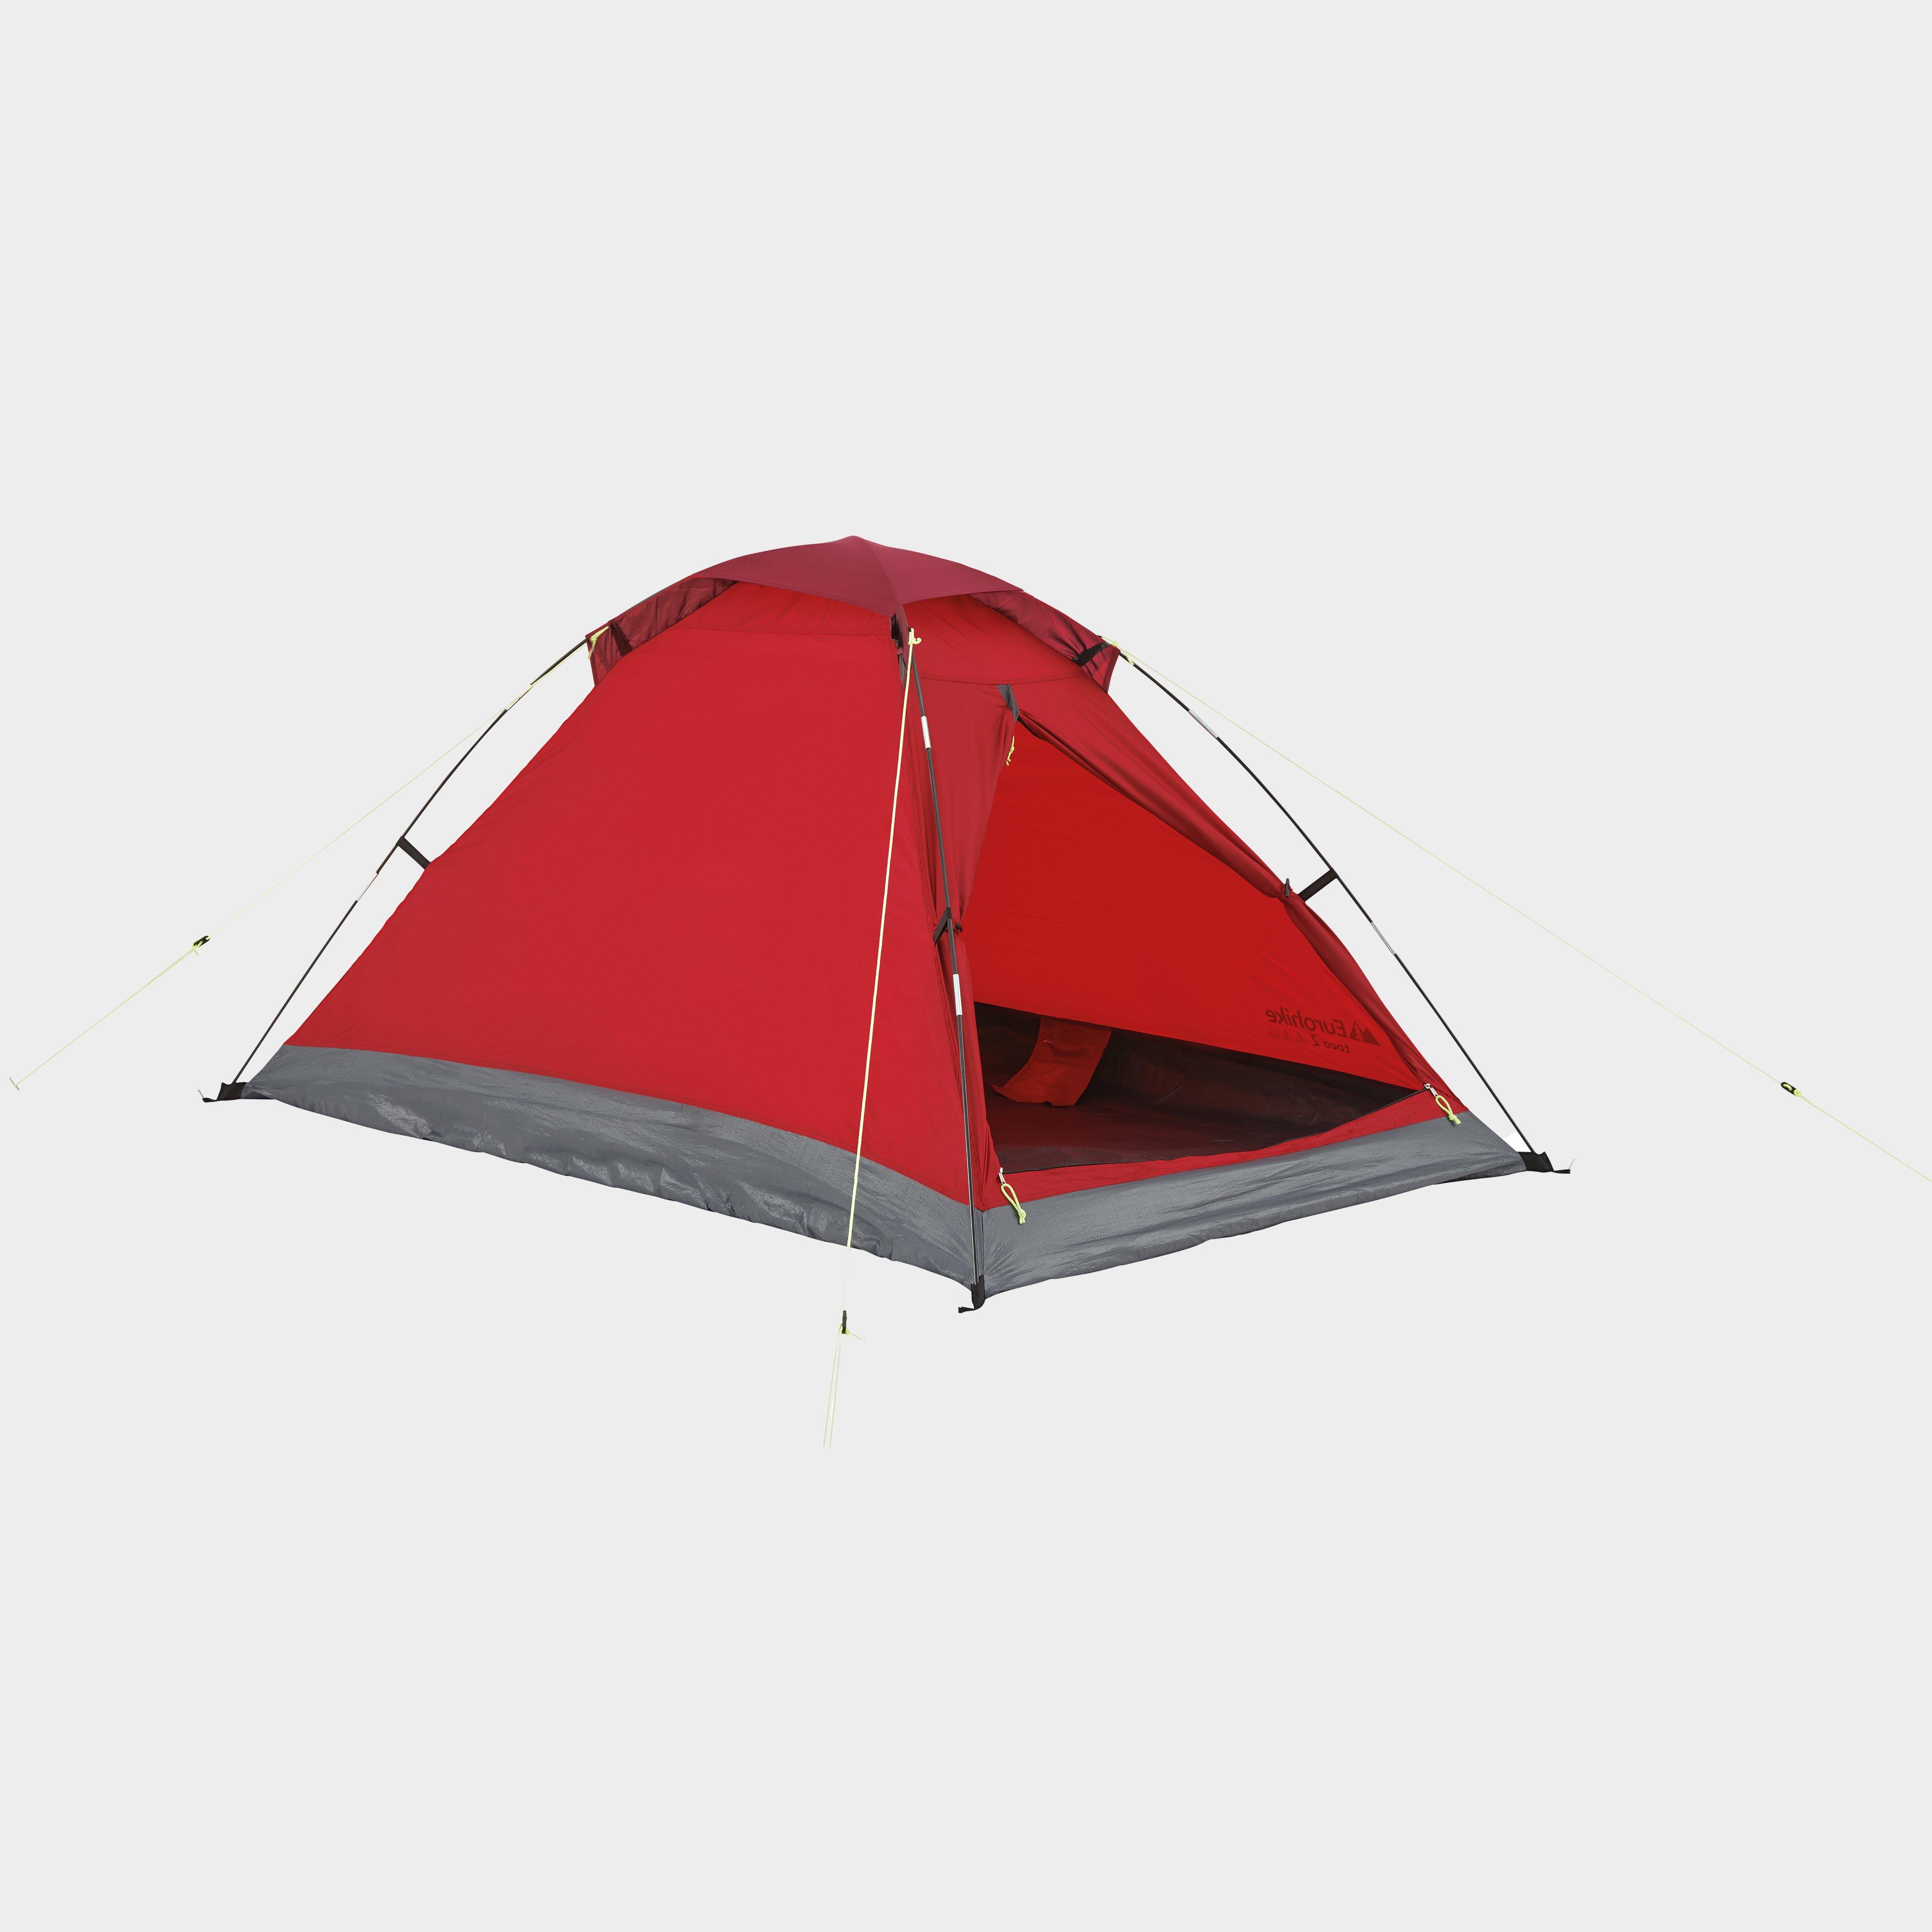 Toco 2 Dome Tent - Red, Red